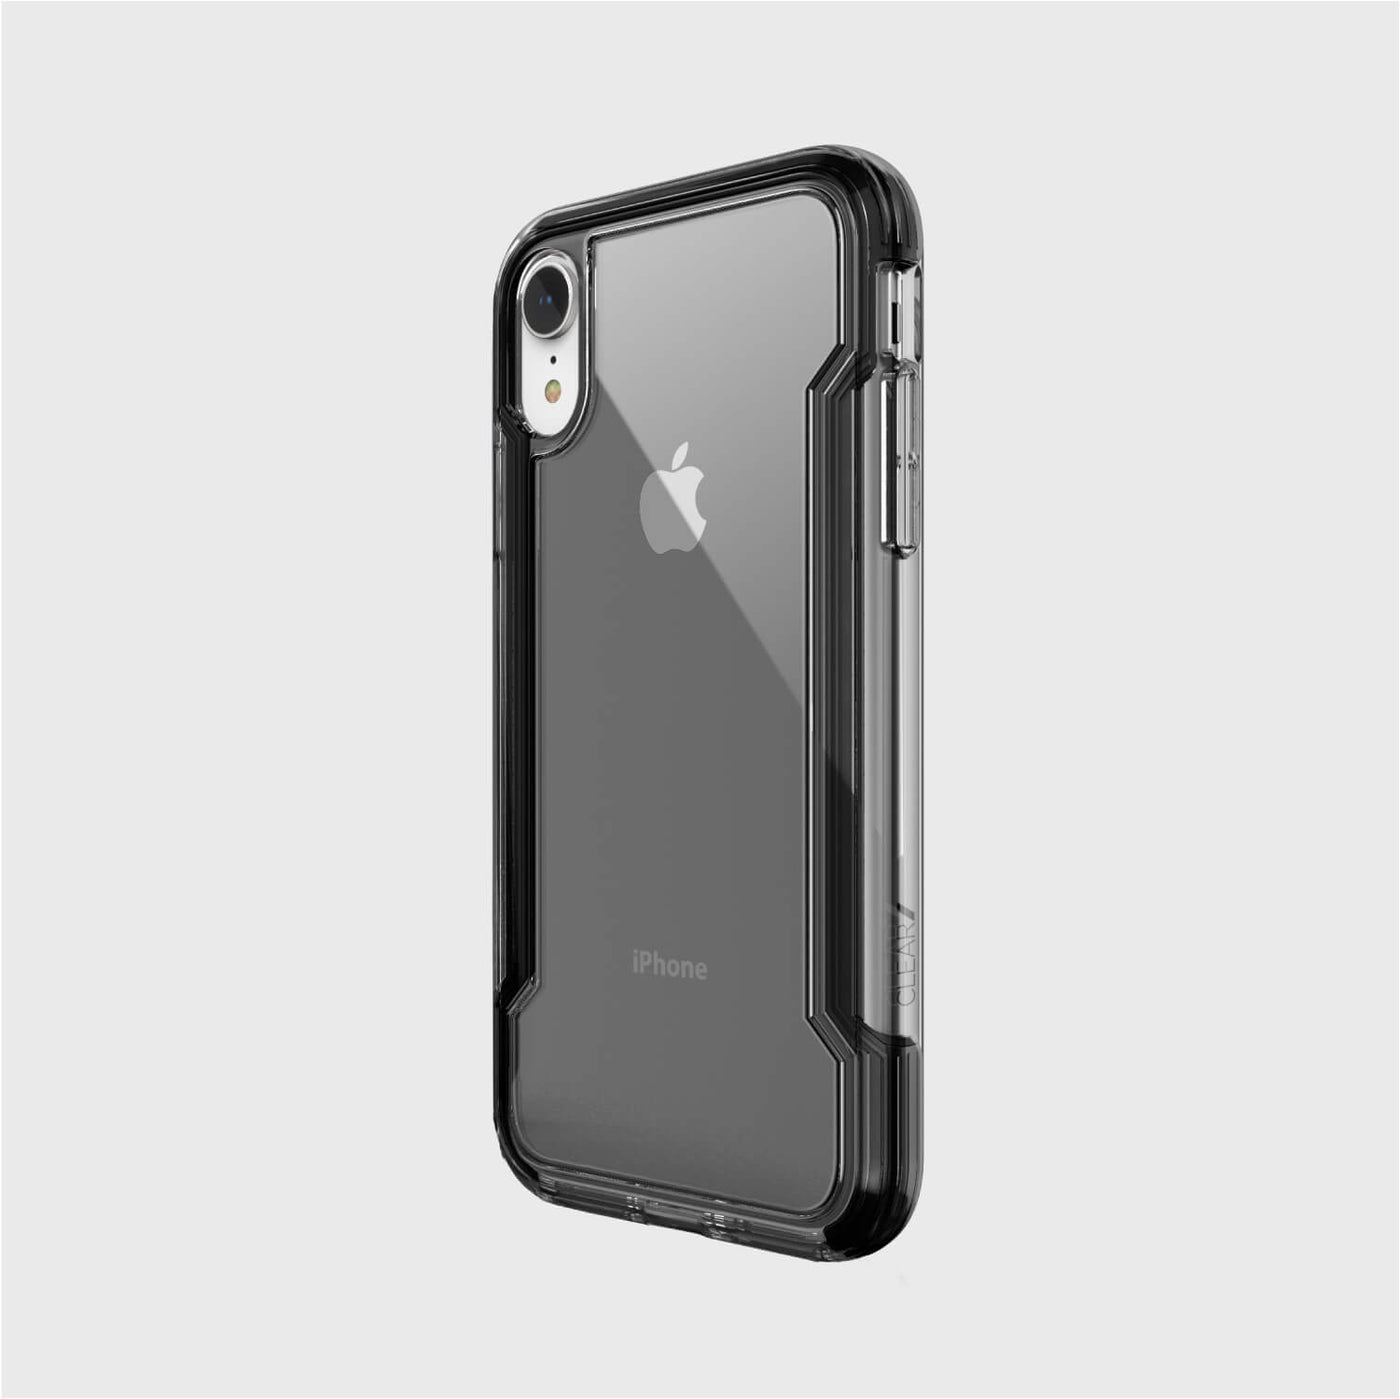 Thin Case for iPhone XR. Raptic Clear in black.